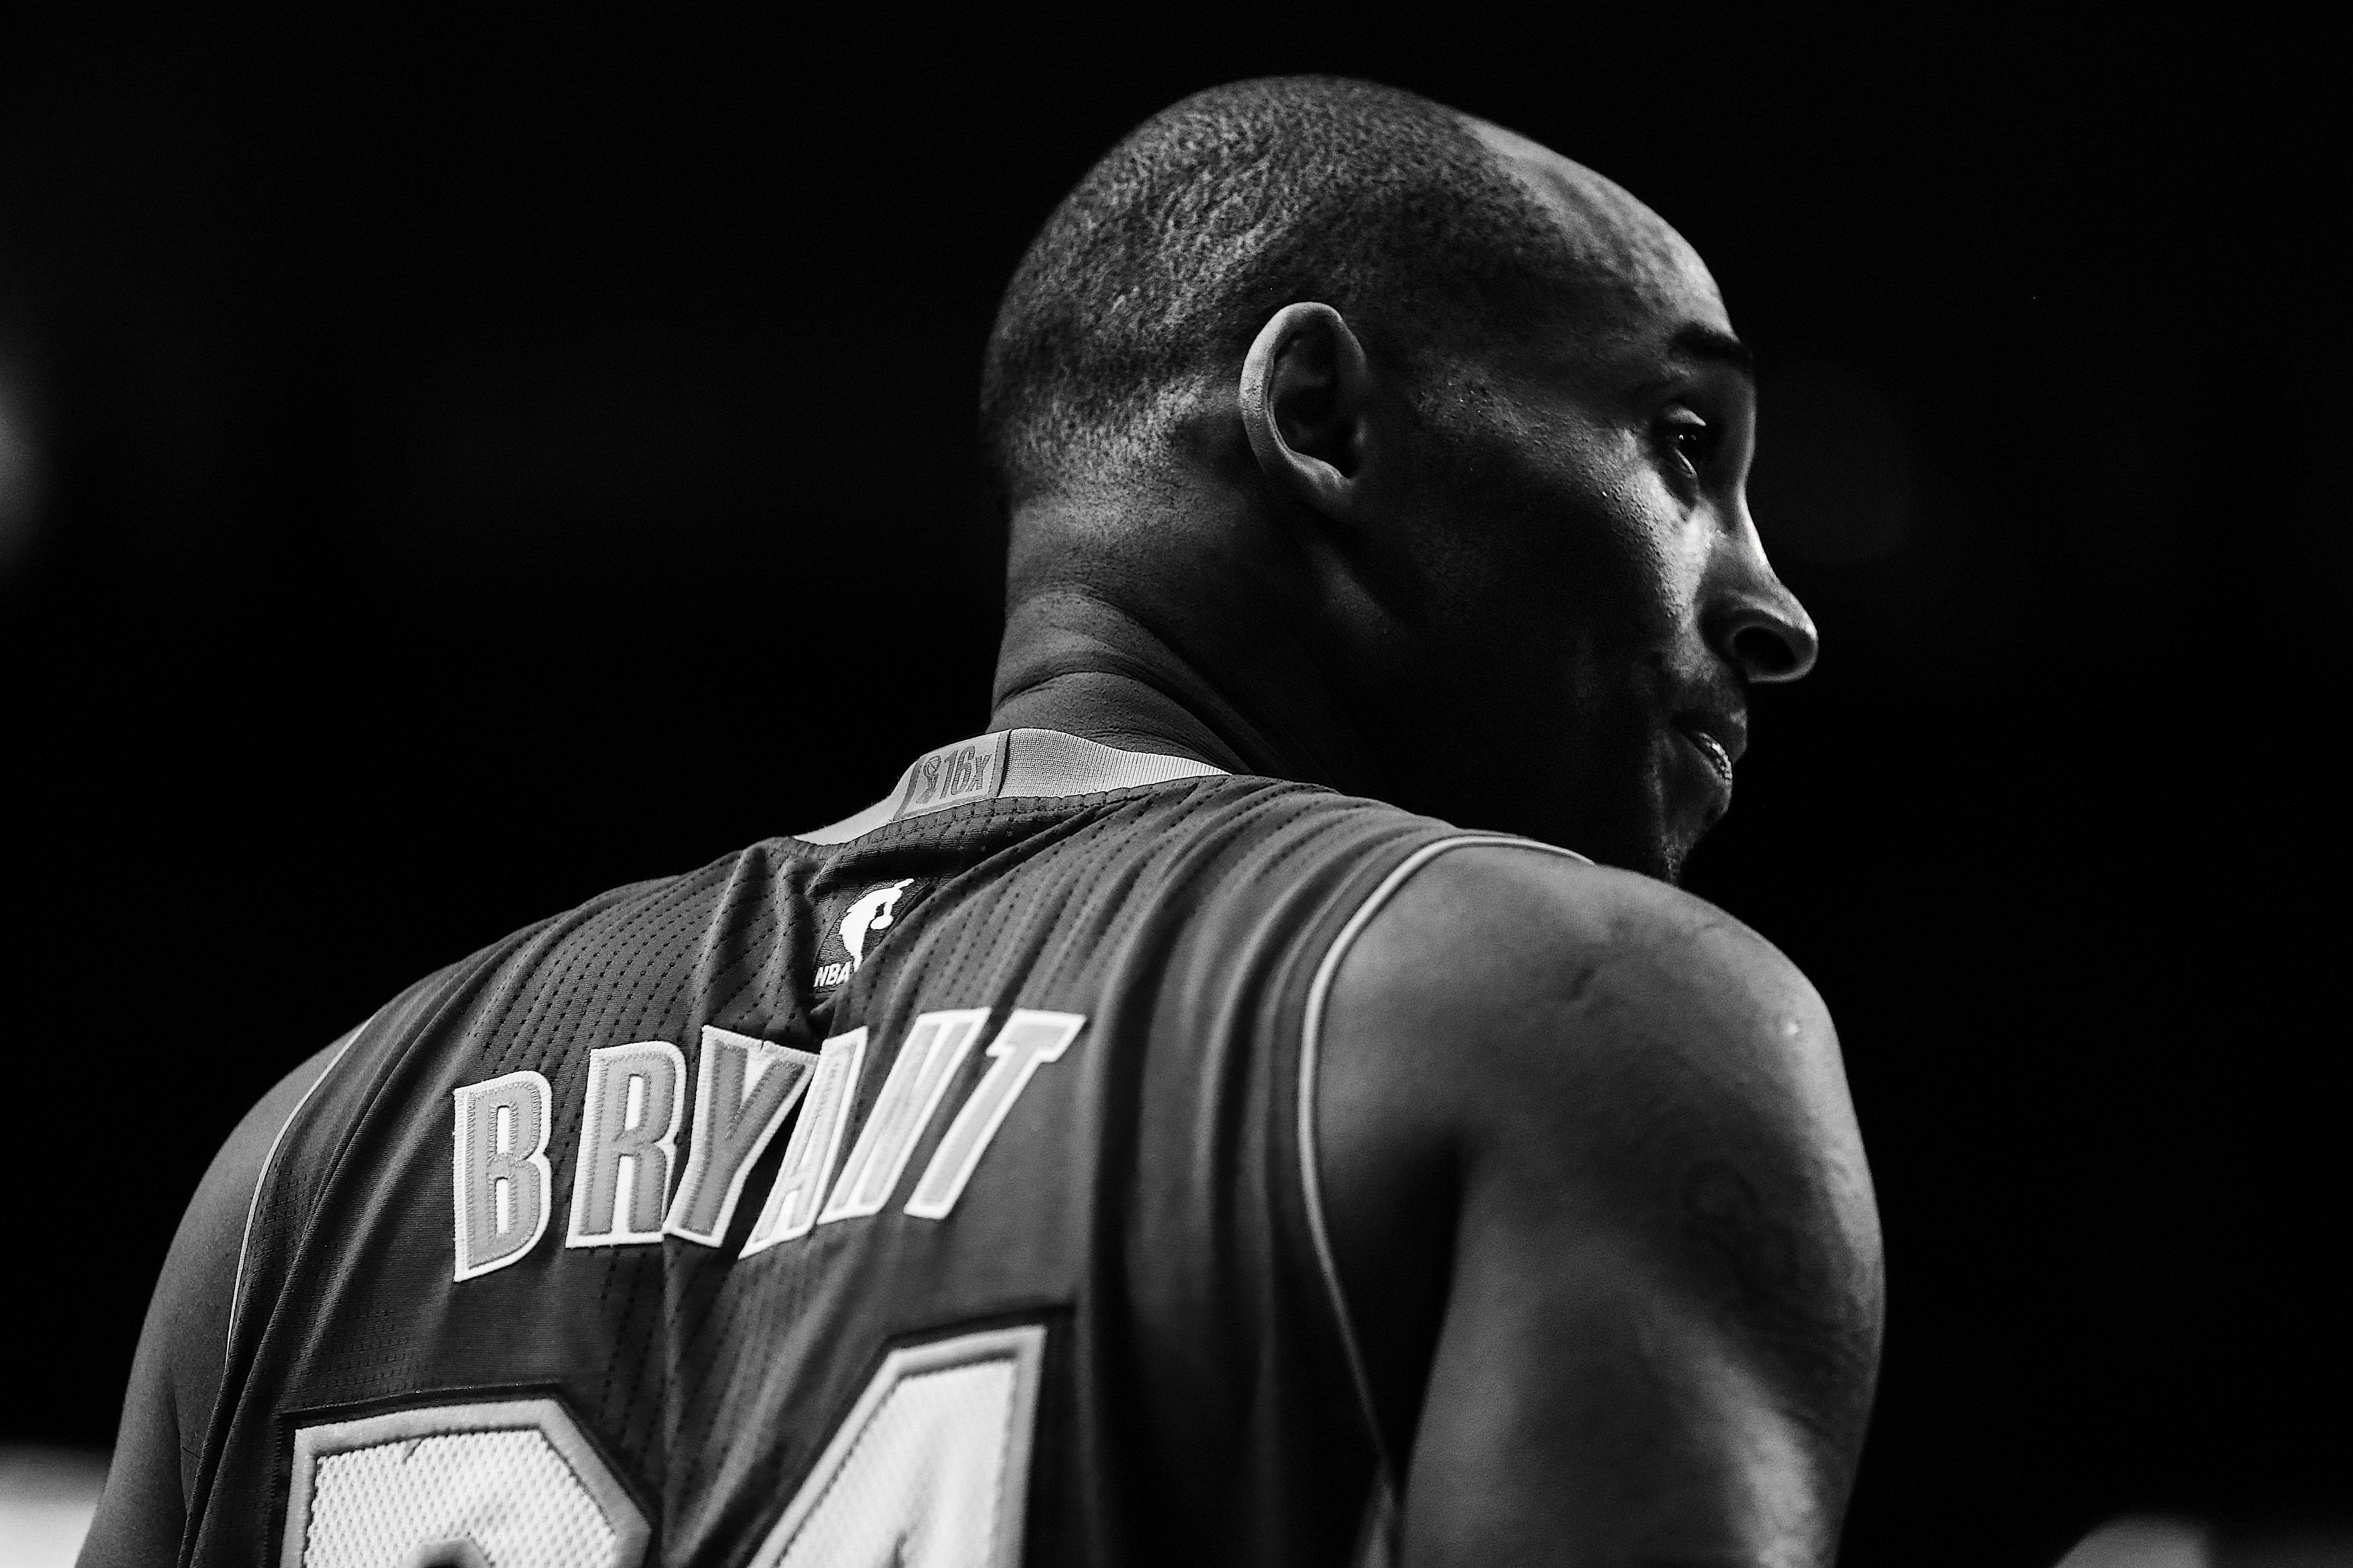 kobe bryant in a black and white photo glaring off into the distance